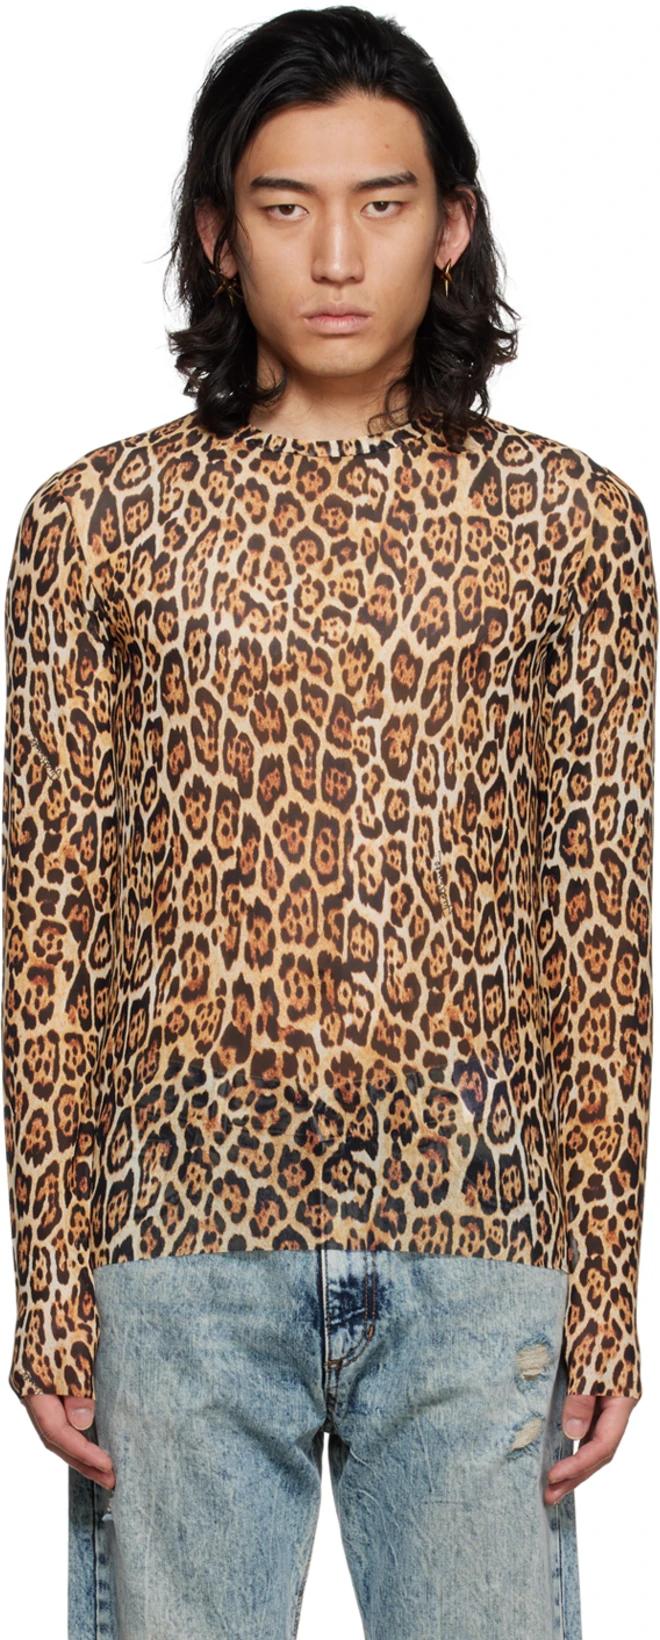 Brown Leopard Long Sleeve T-Shirt by JUST CAVALLI